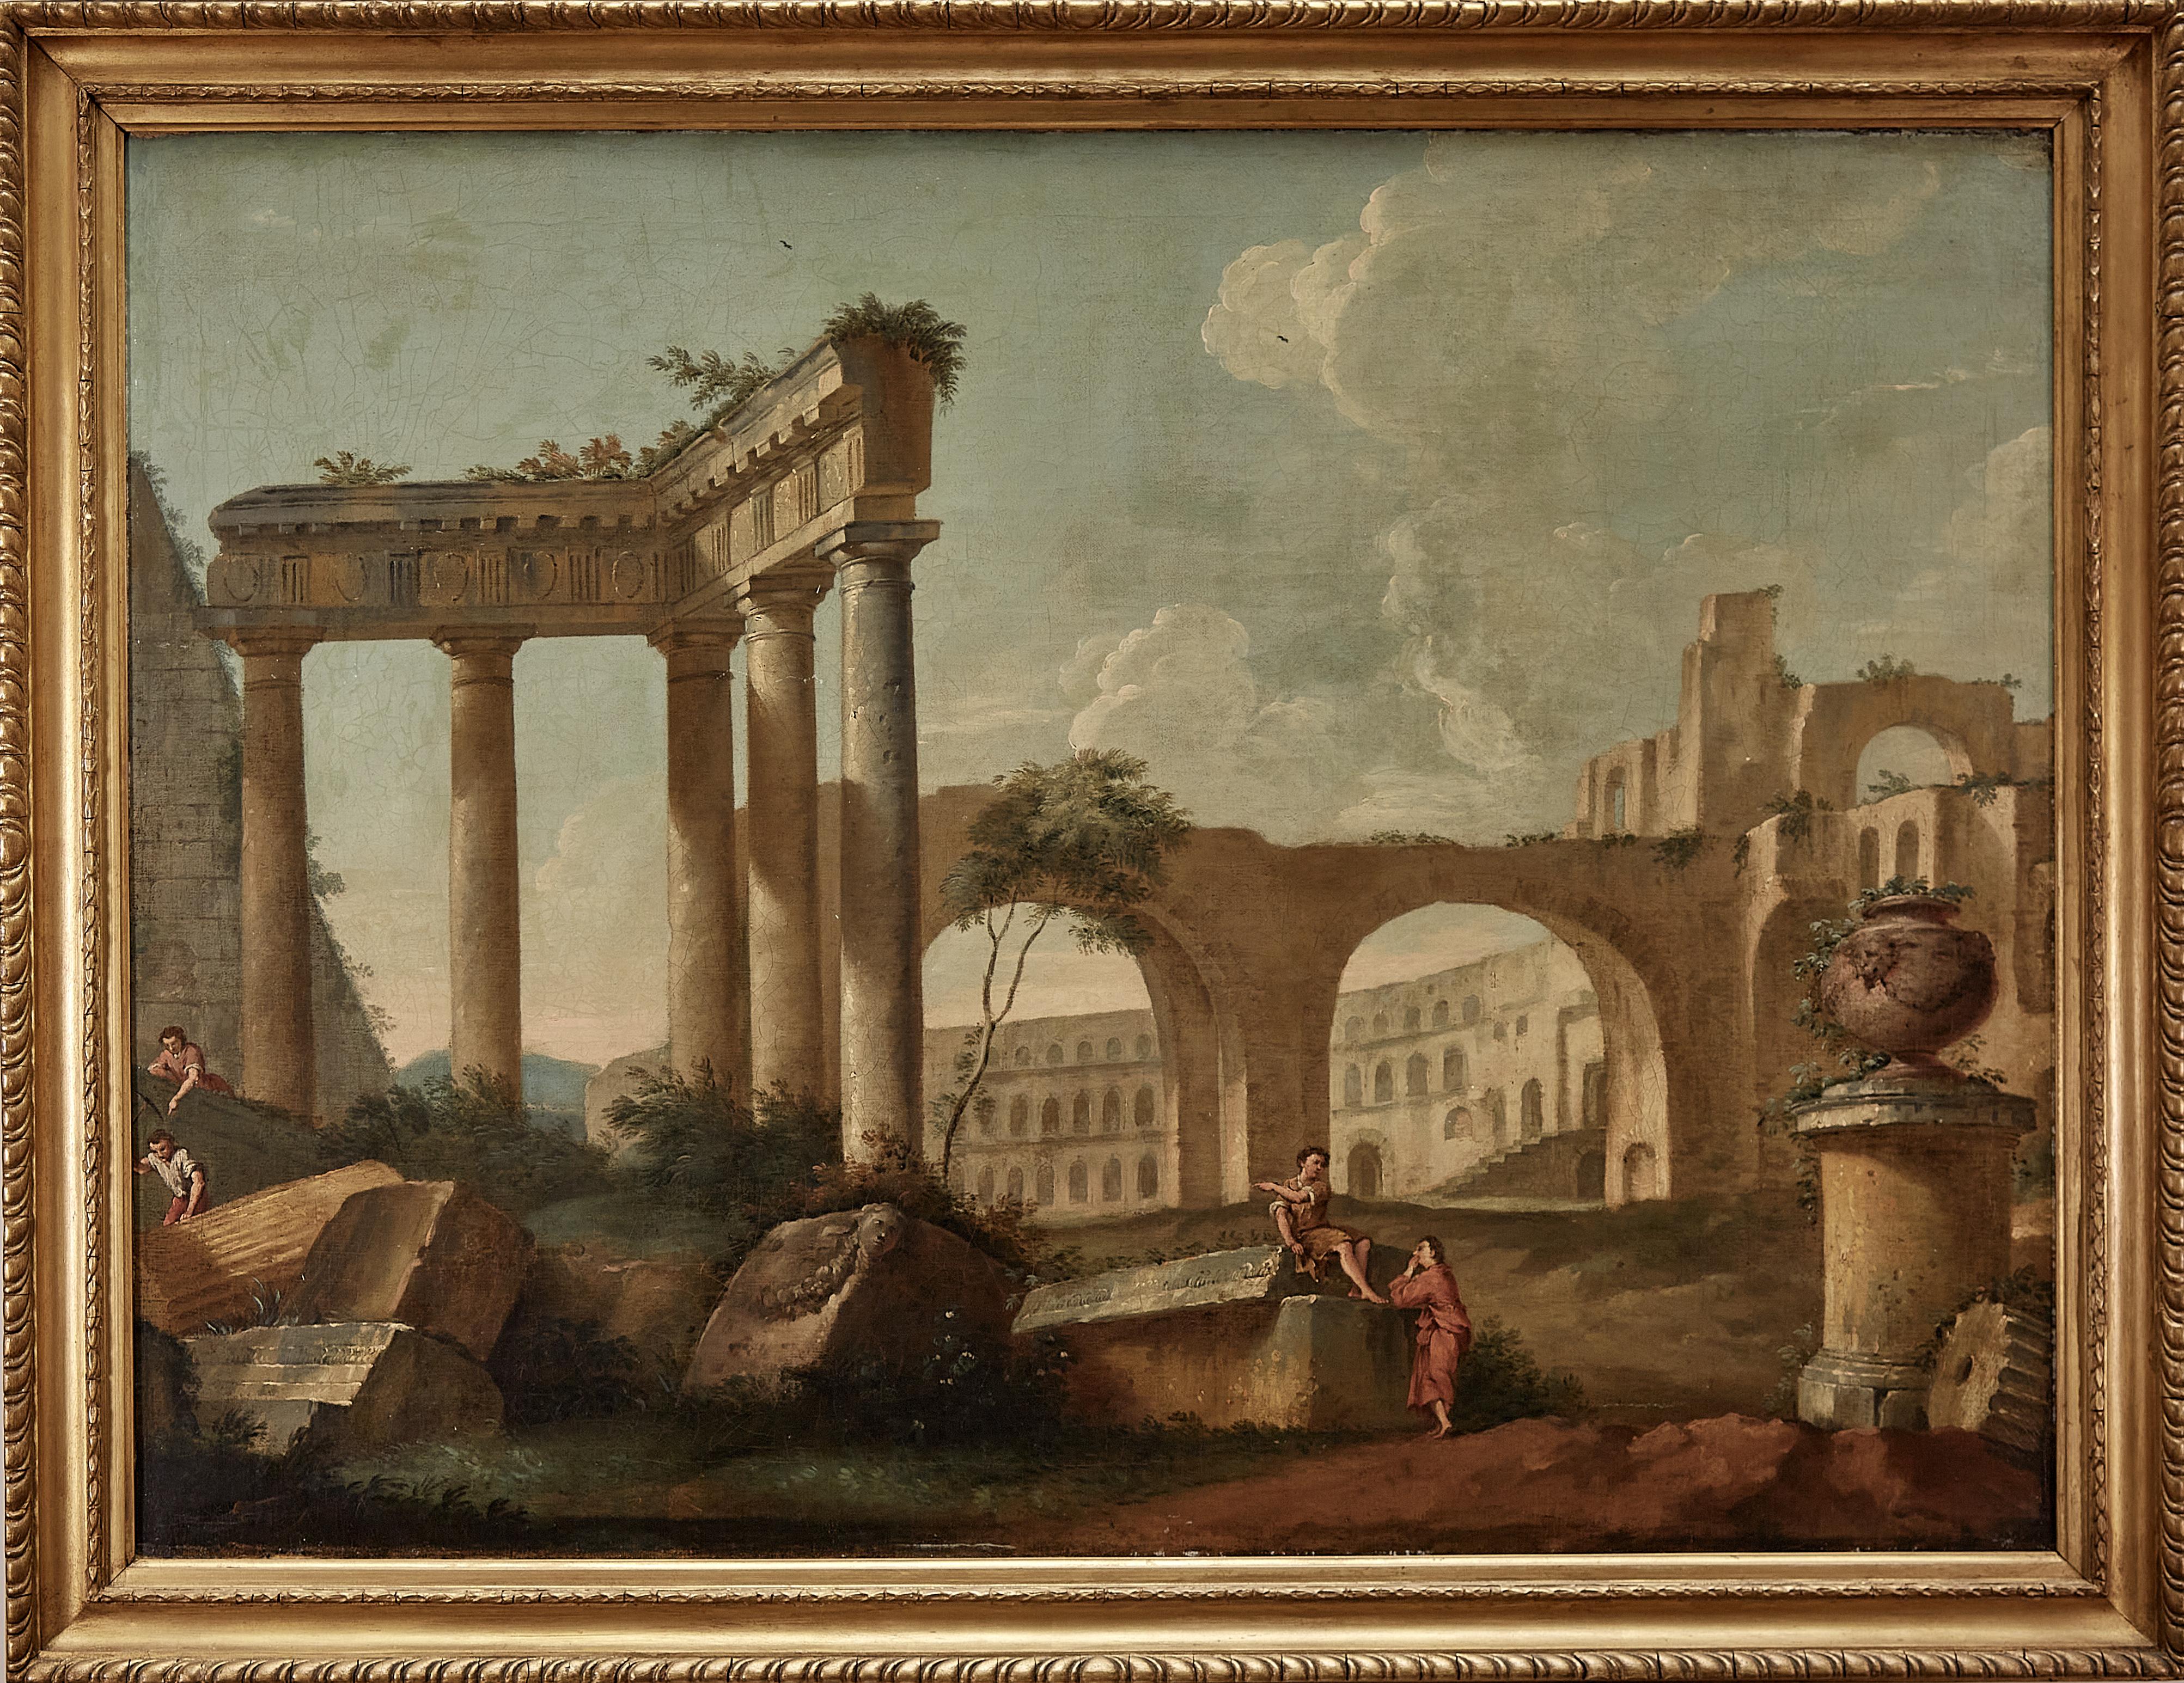 Pair of 18th century Italian paintings of landscapes with classical ruins - Painting by Unknown